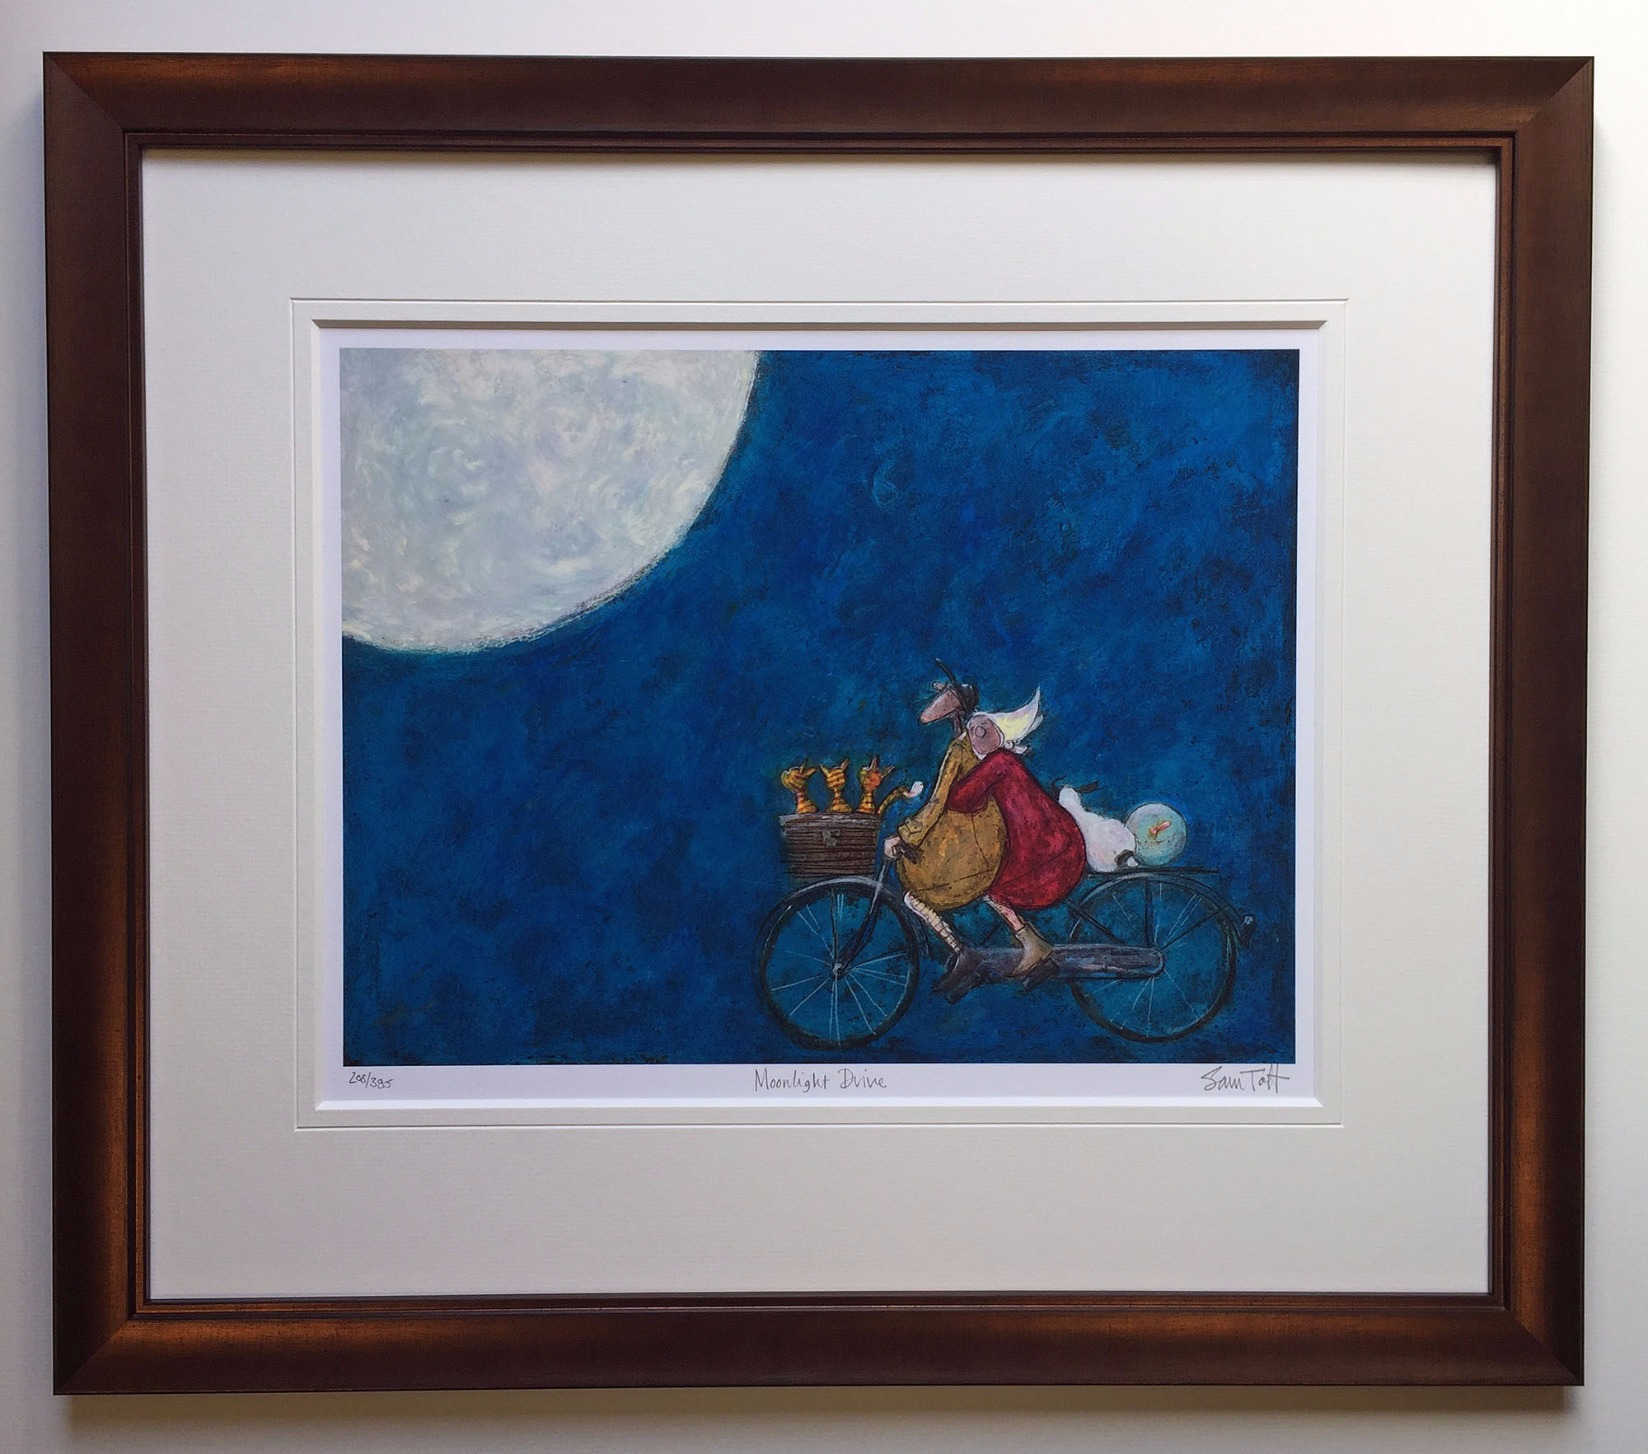 Moonlight Drive by Sam Toft, Love | Couple | Romance | Bicycle | Dog